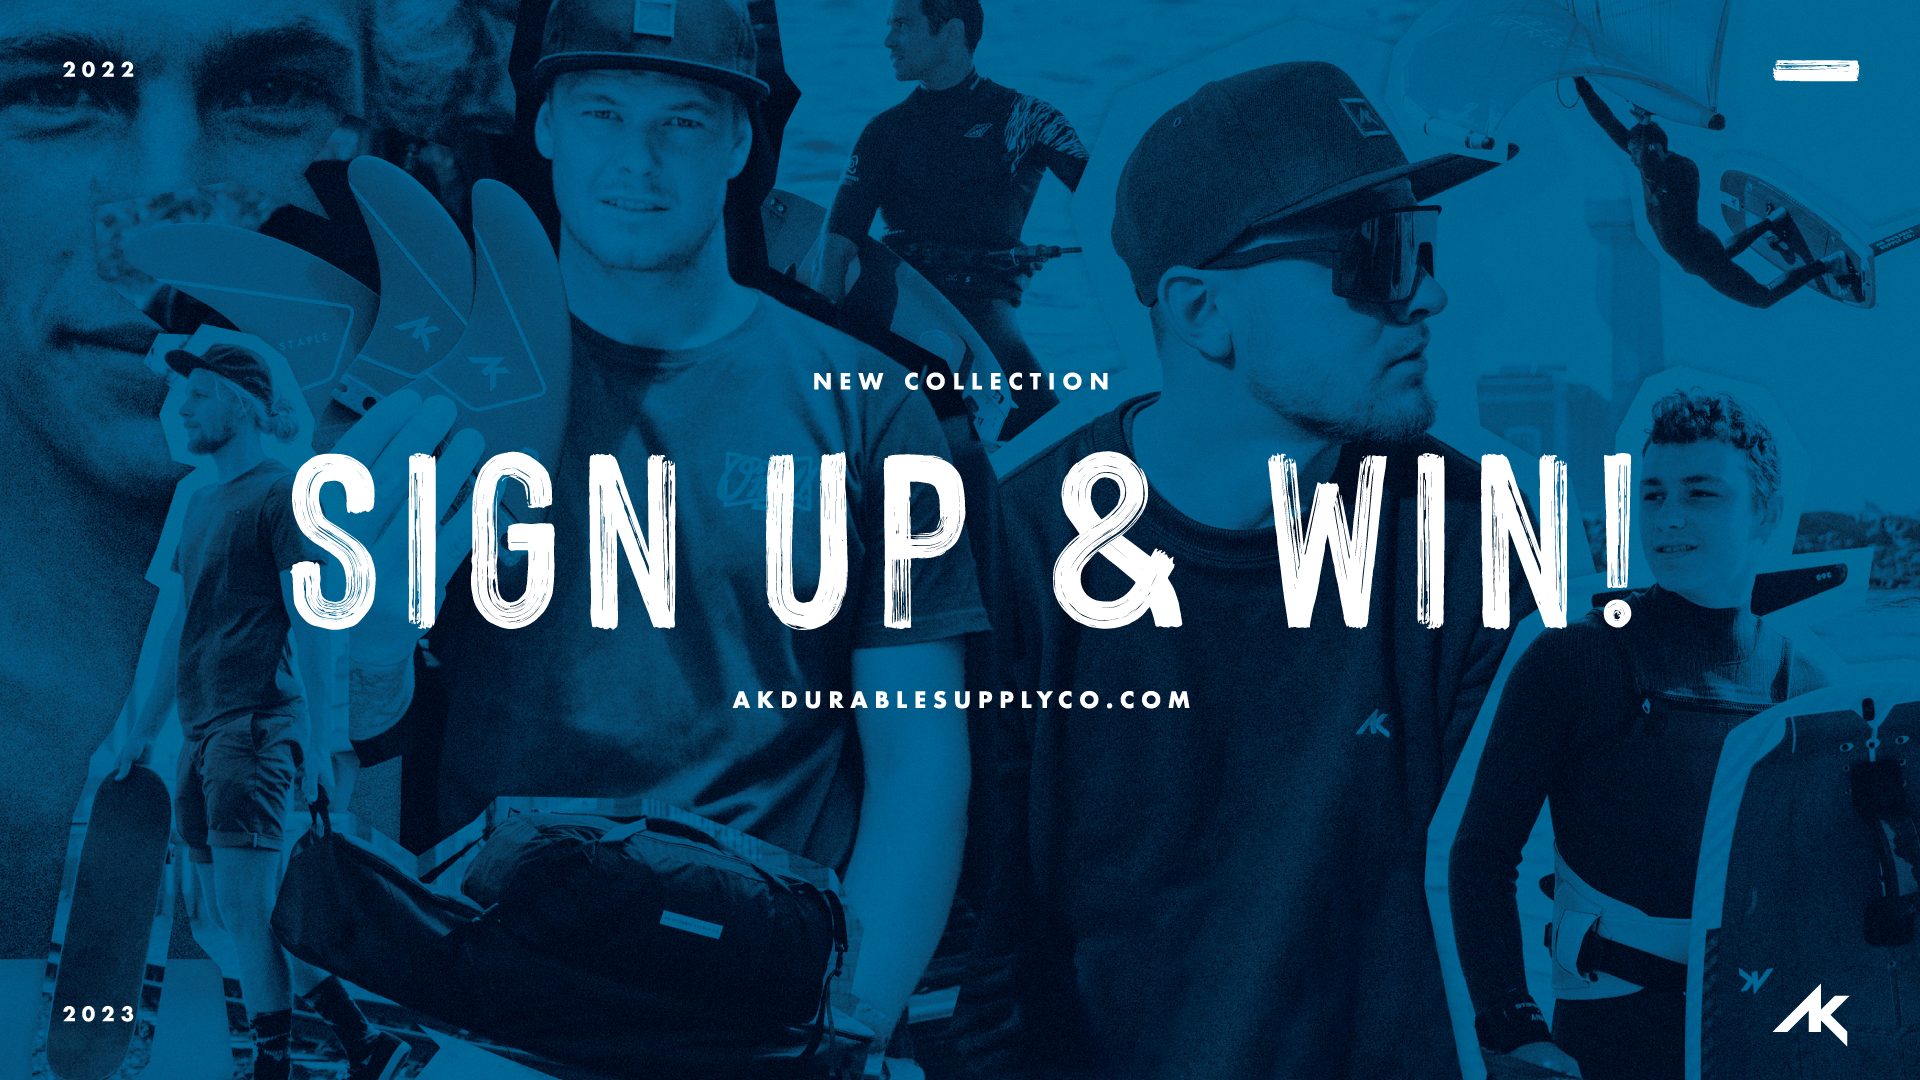 akdurablesupplyco-AK_New-COllection_Sign-Up-and-WinSign Up & Win!News